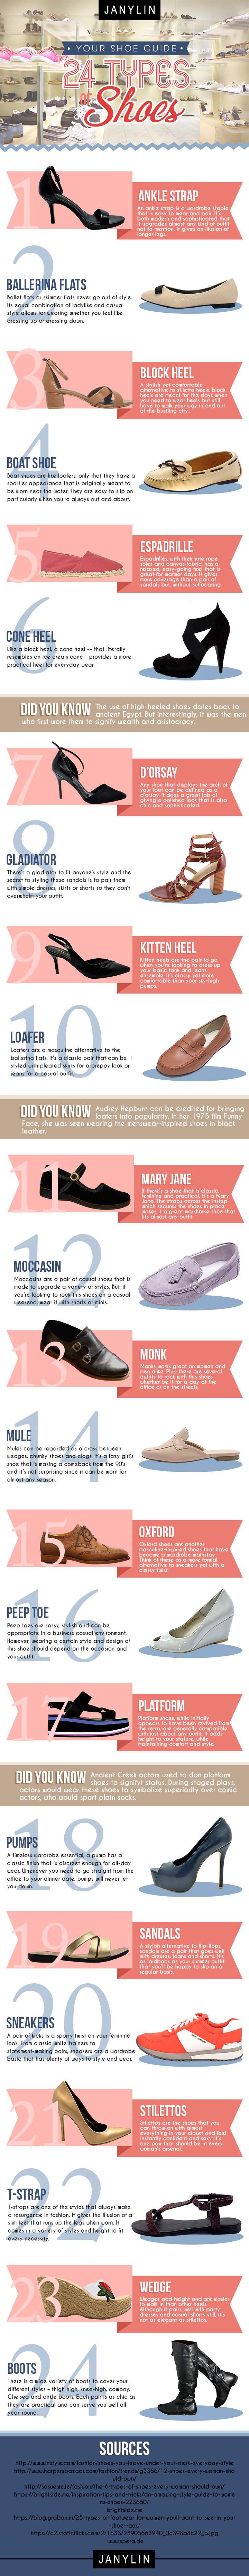 24 Types of Shoes